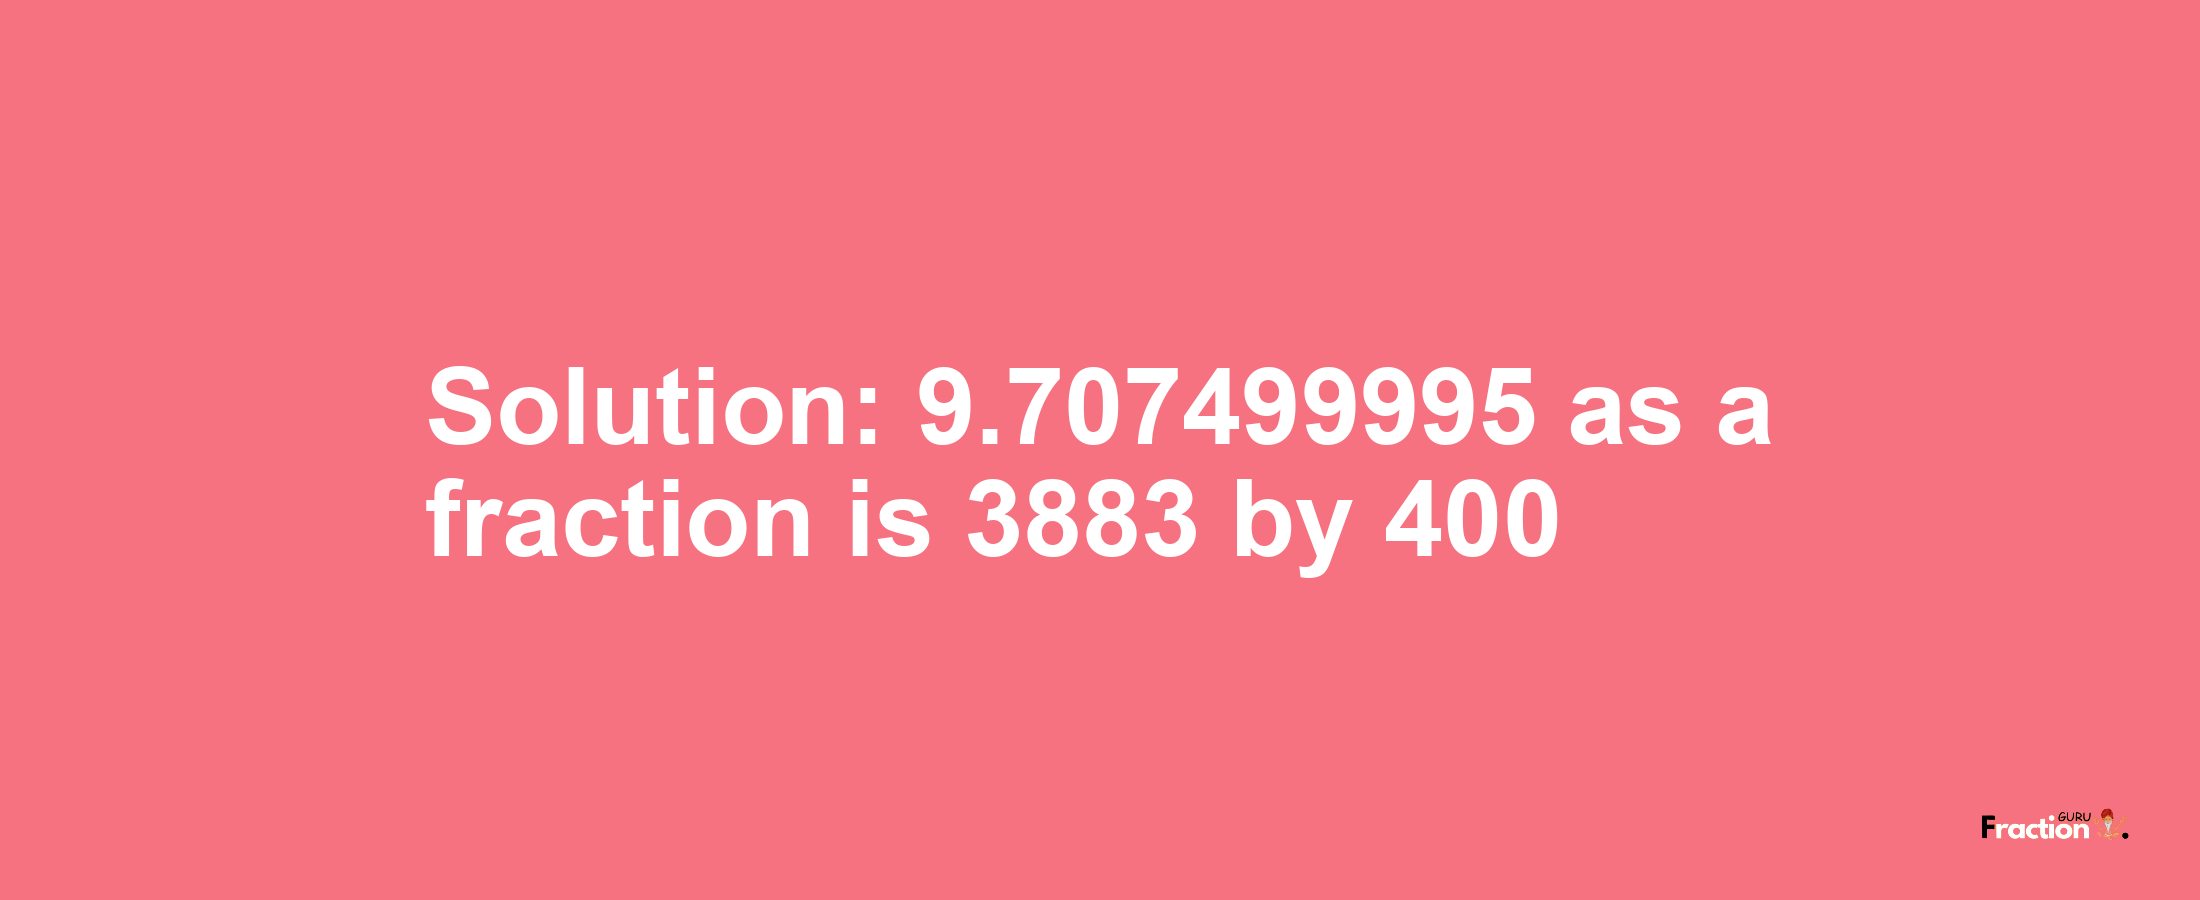 Solution:9.707499995 as a fraction is 3883/400